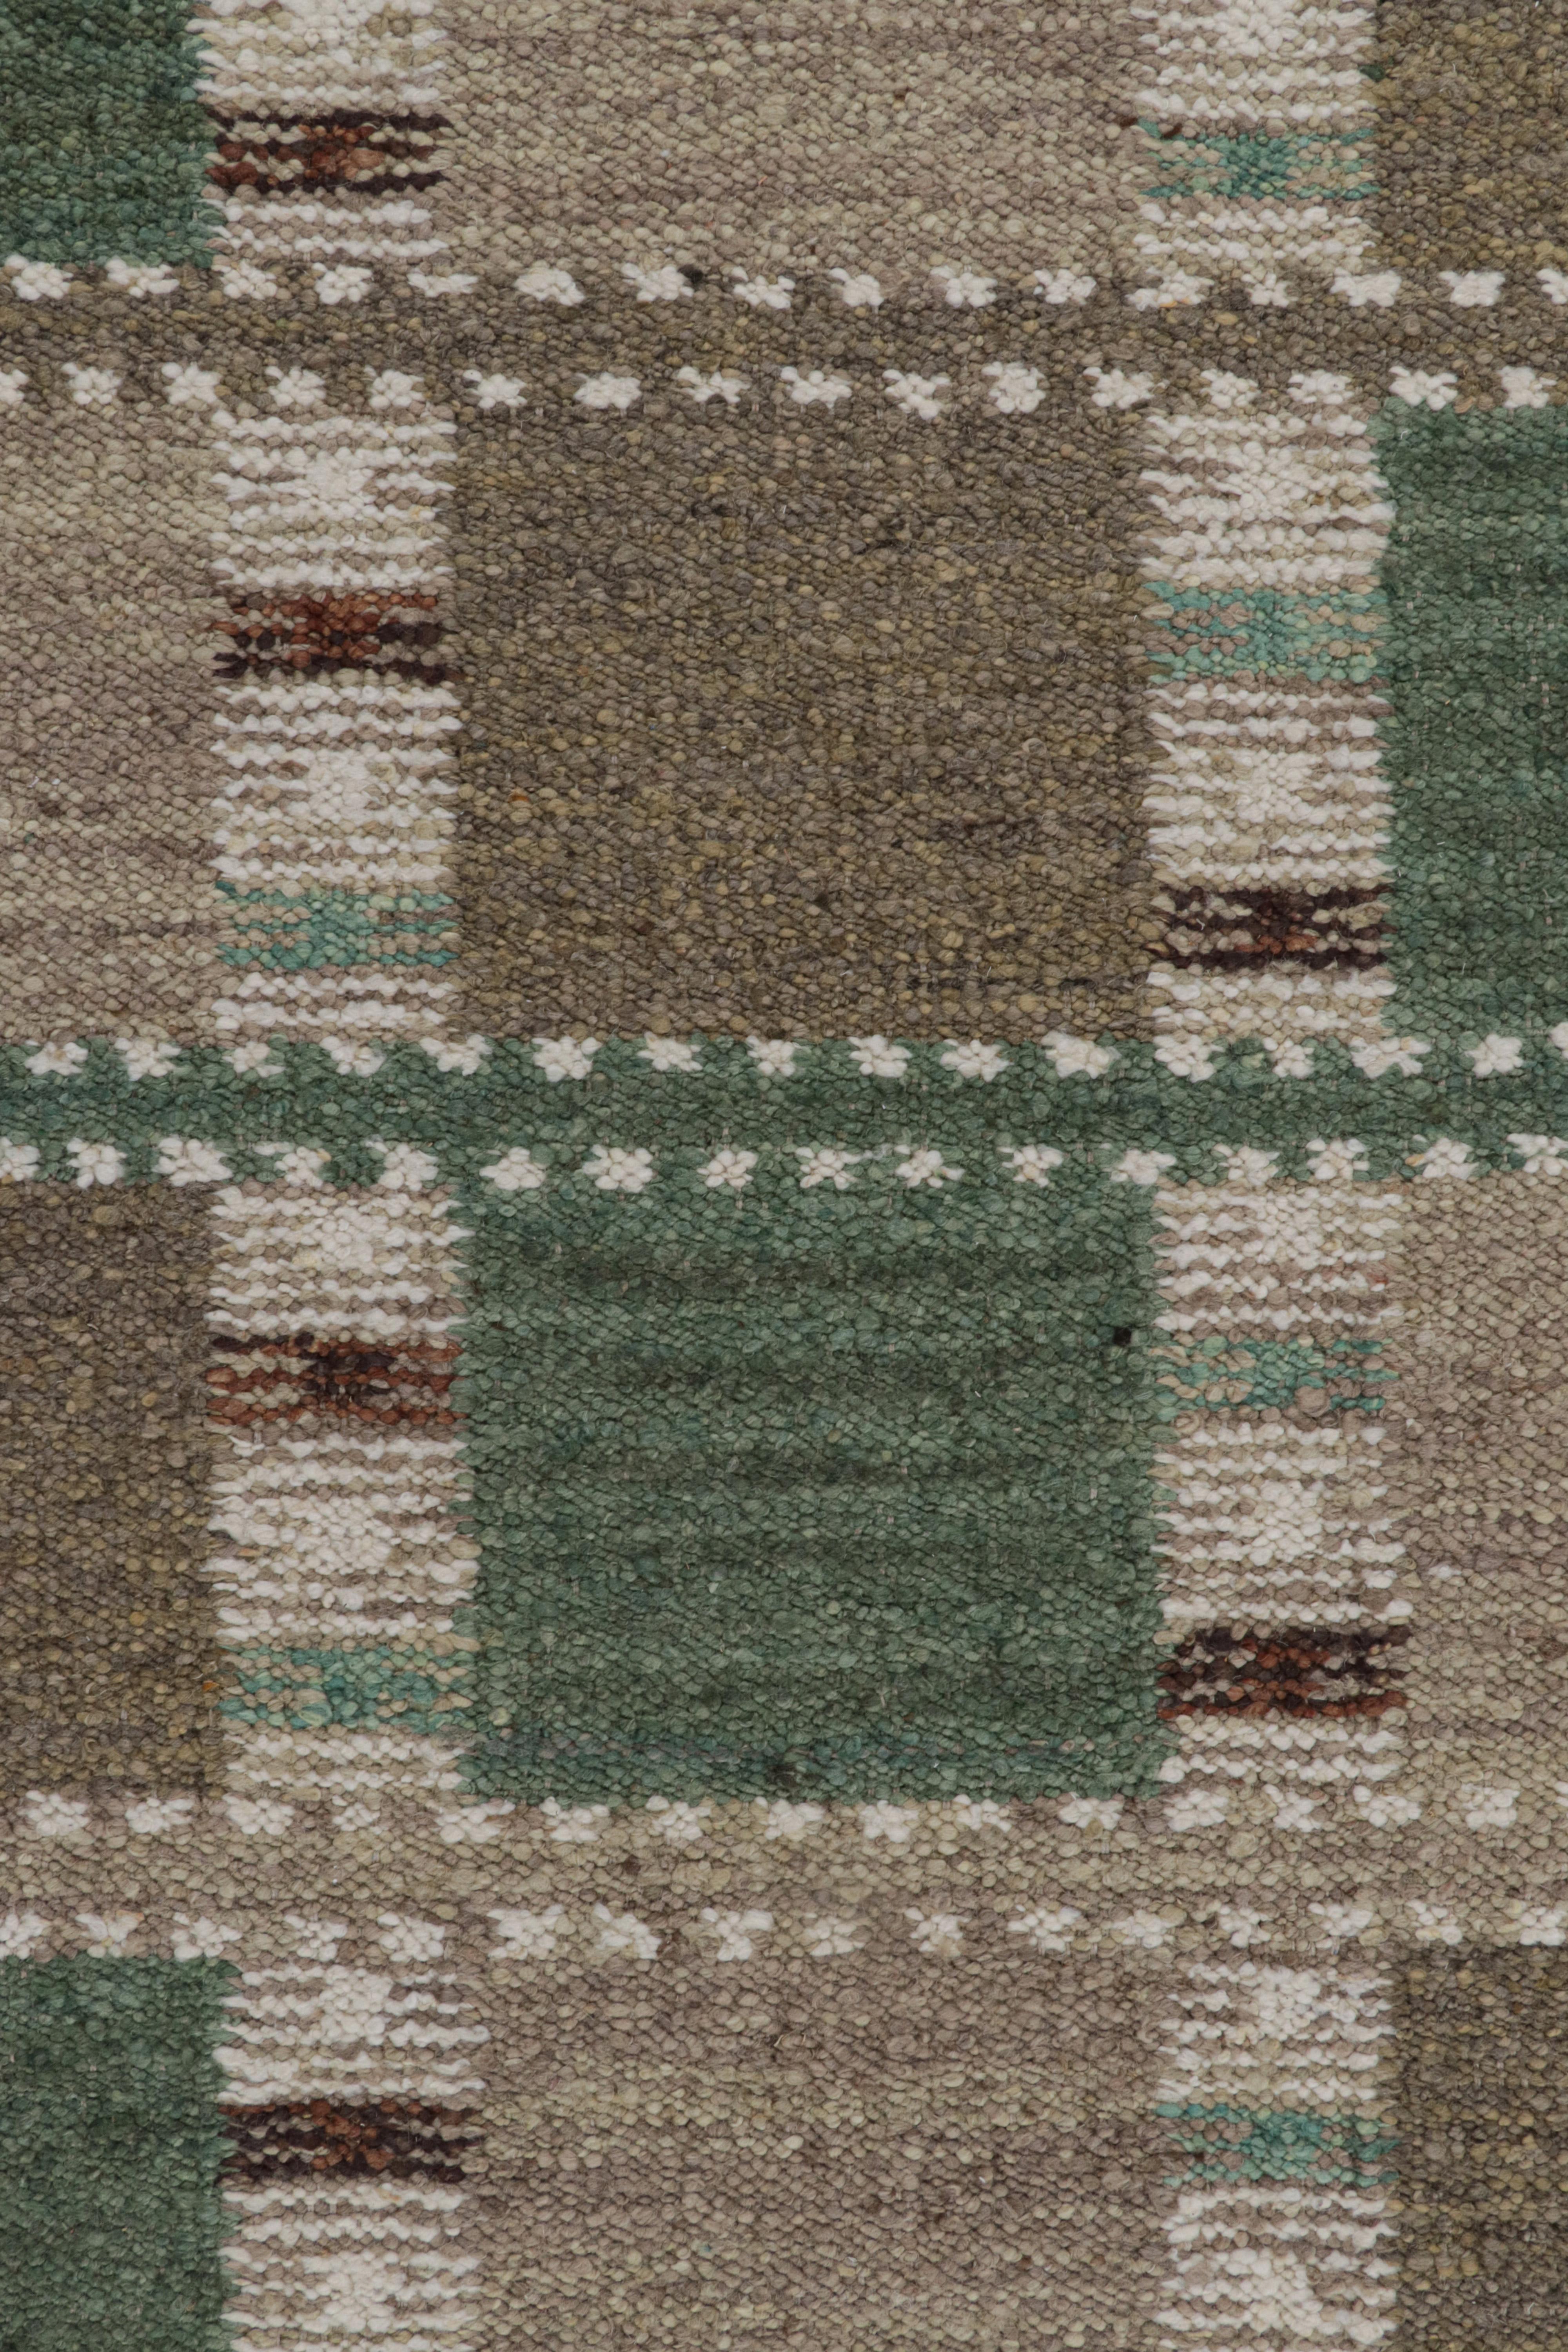 Modern Rug & Kilim’s Scandinavian Style Rug in Green and Beige-Brown with Patterns For Sale